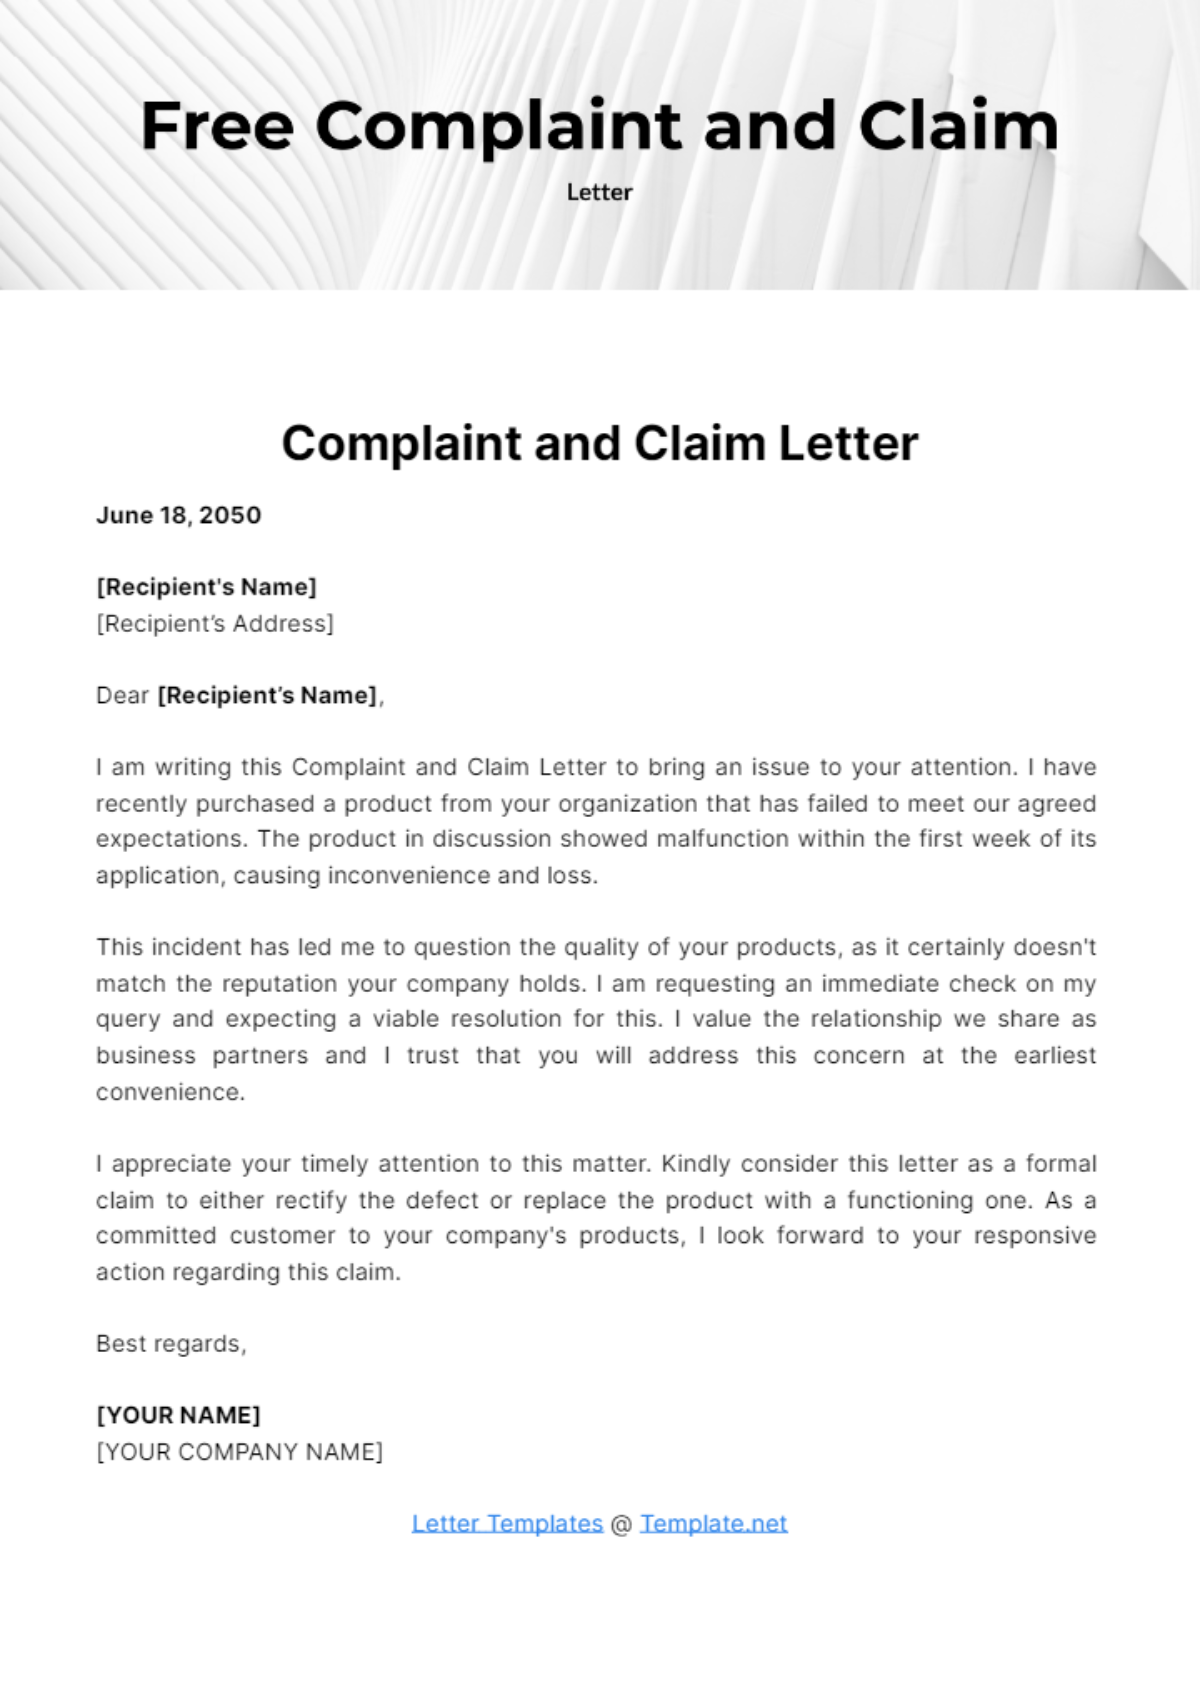 Complaint and Claim Letter Template